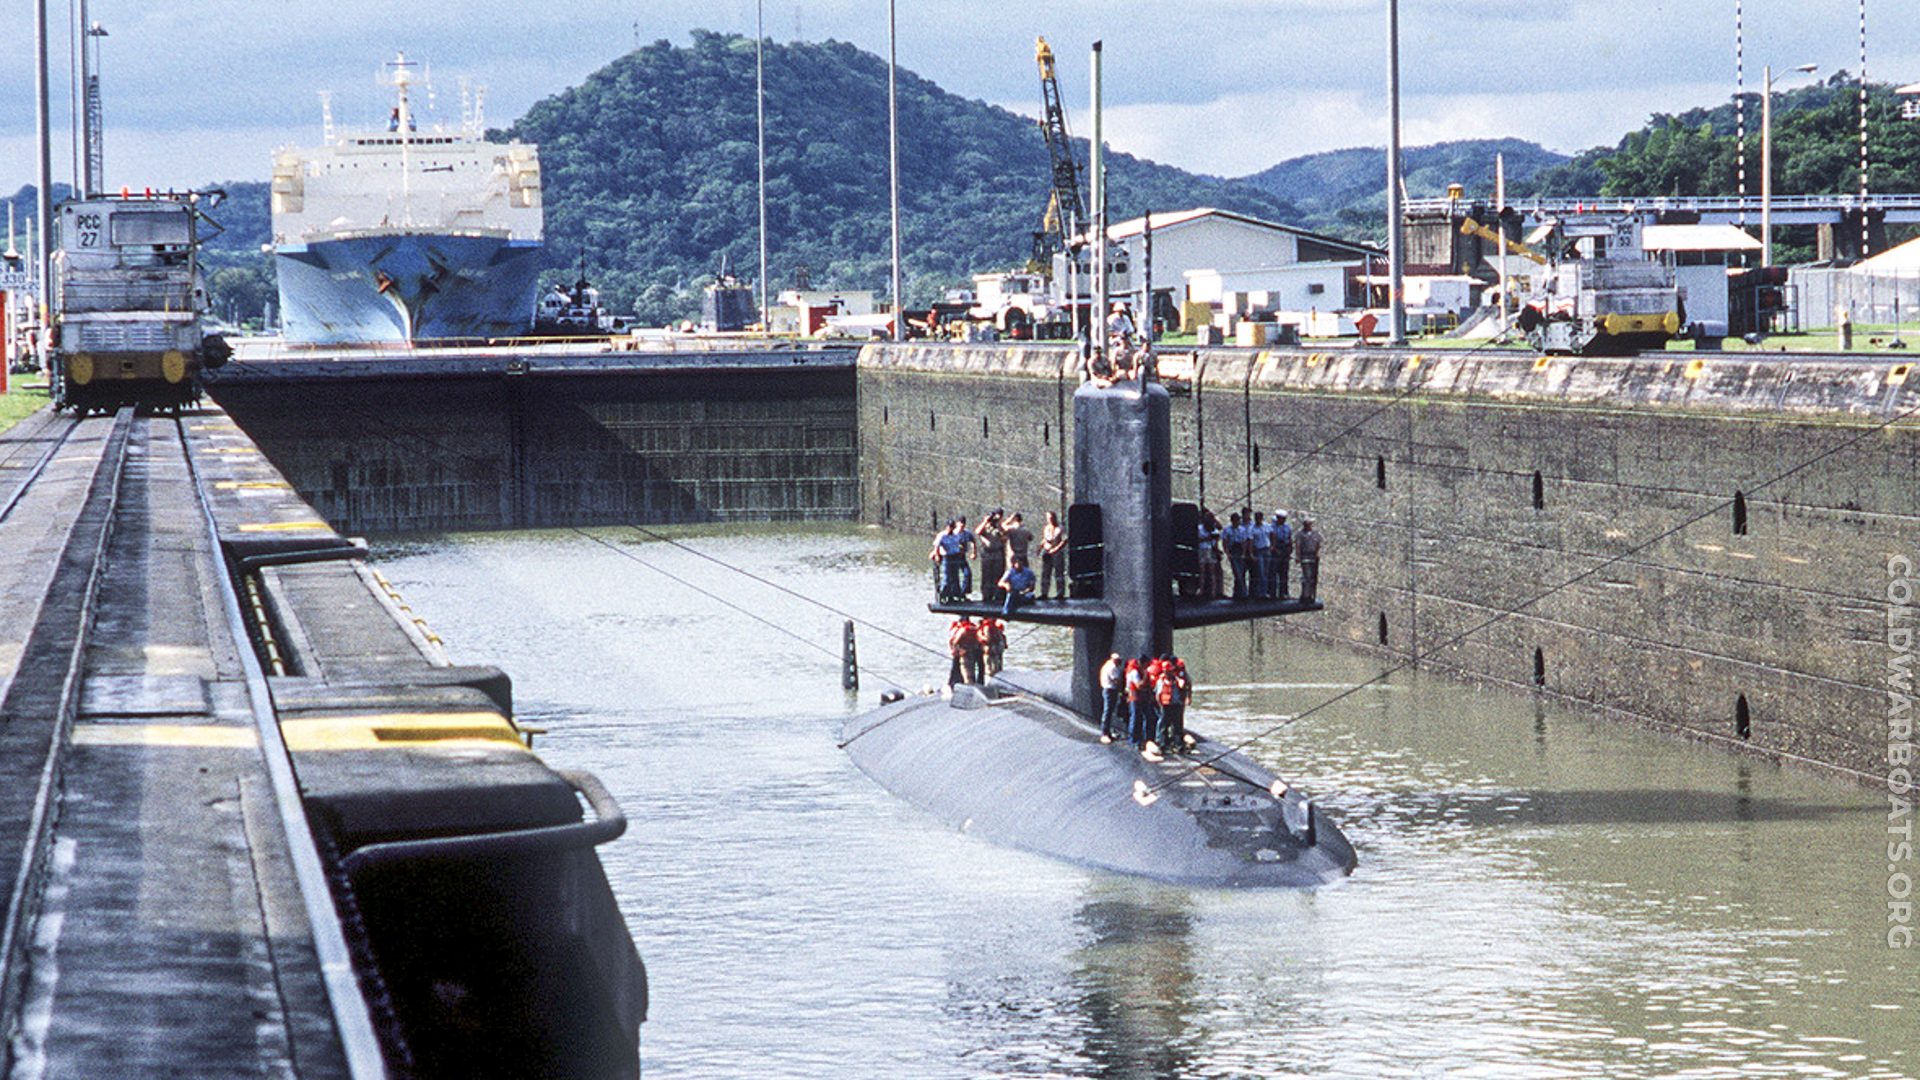 USS SHARK (SSN 591) in the locks, transiting the Panama Canal.